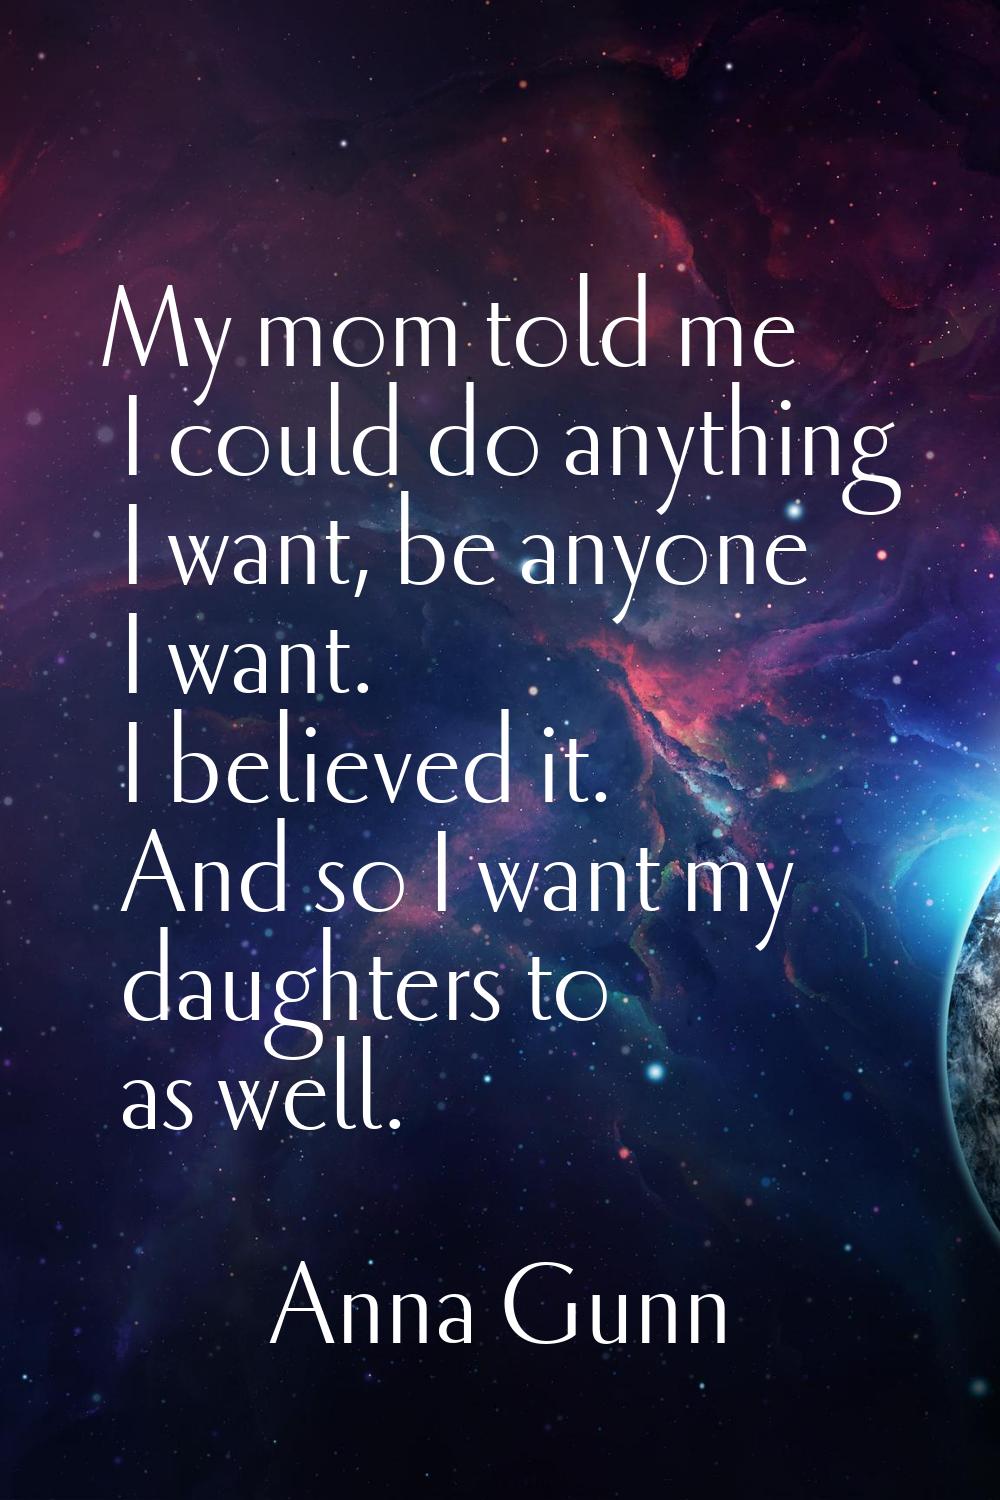 My mom told me I could do anything I want, be anyone I want. I believed it. And so I want my daught